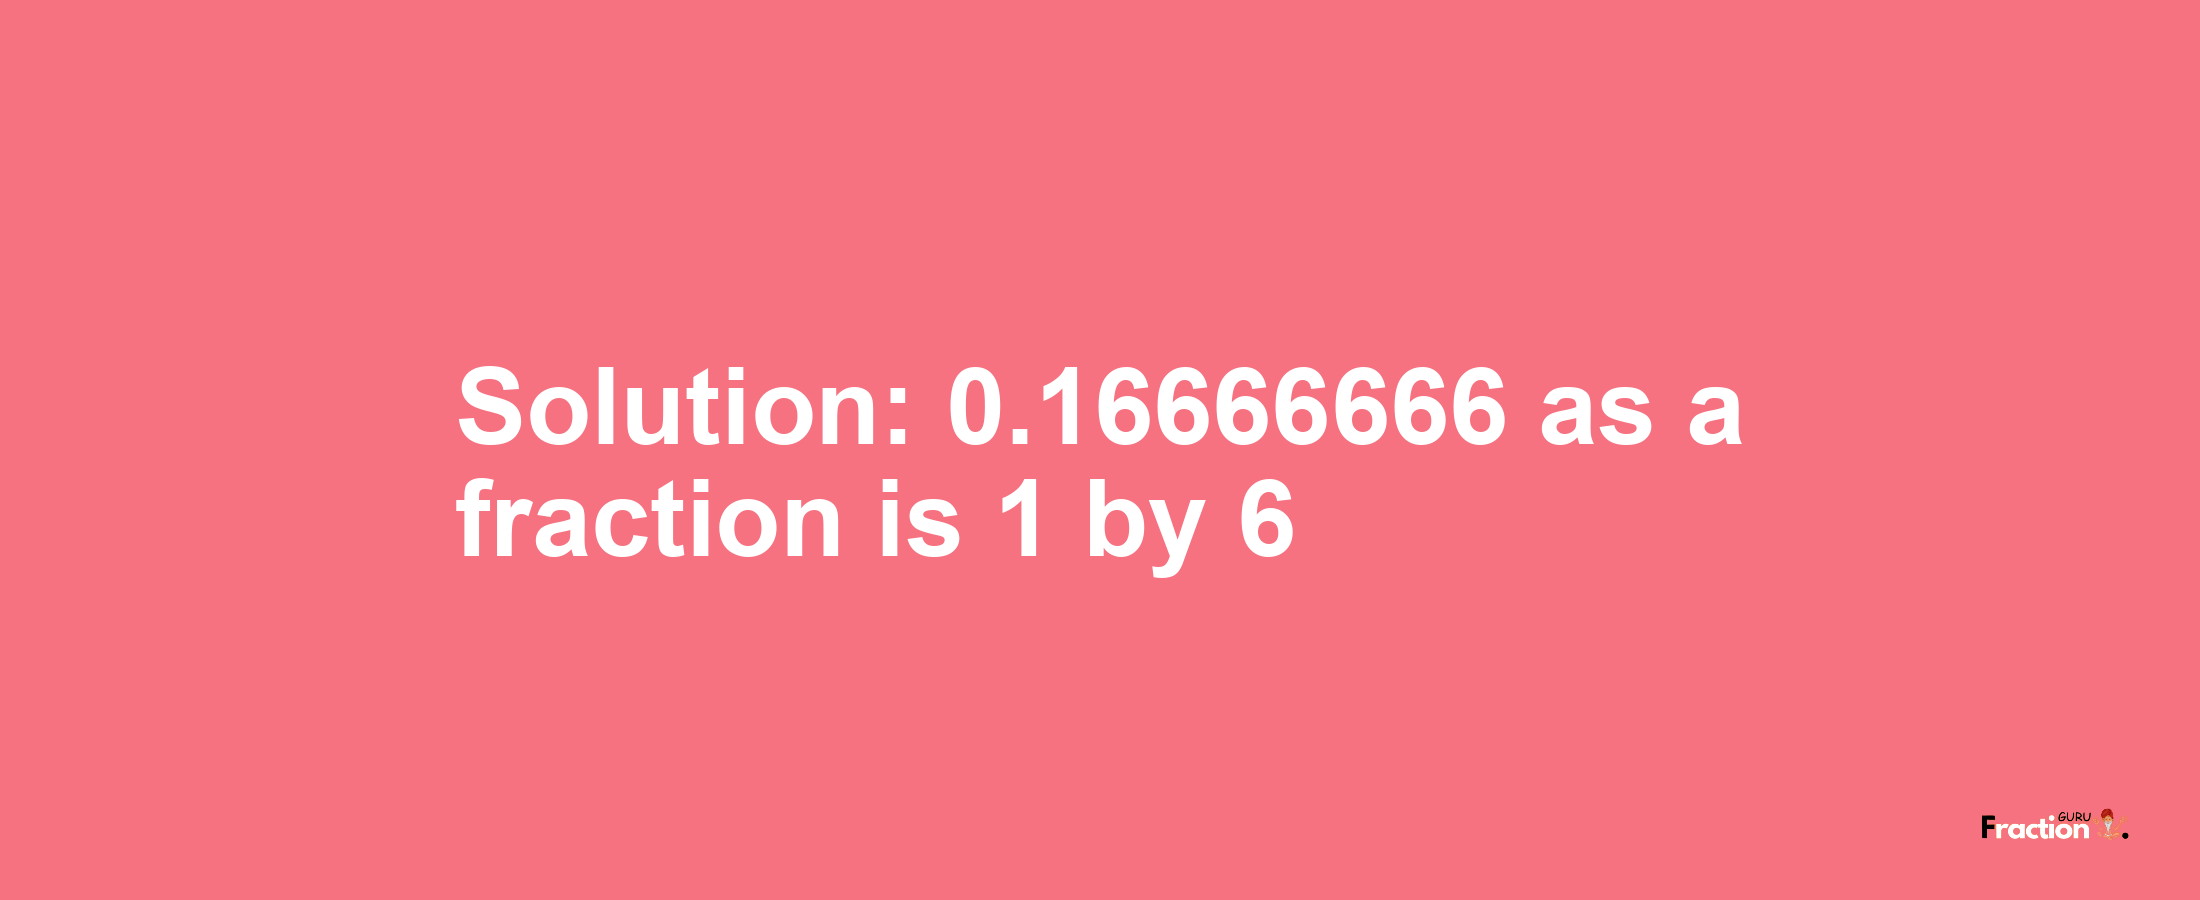 Solution:0.16666666 as a fraction is 1/6